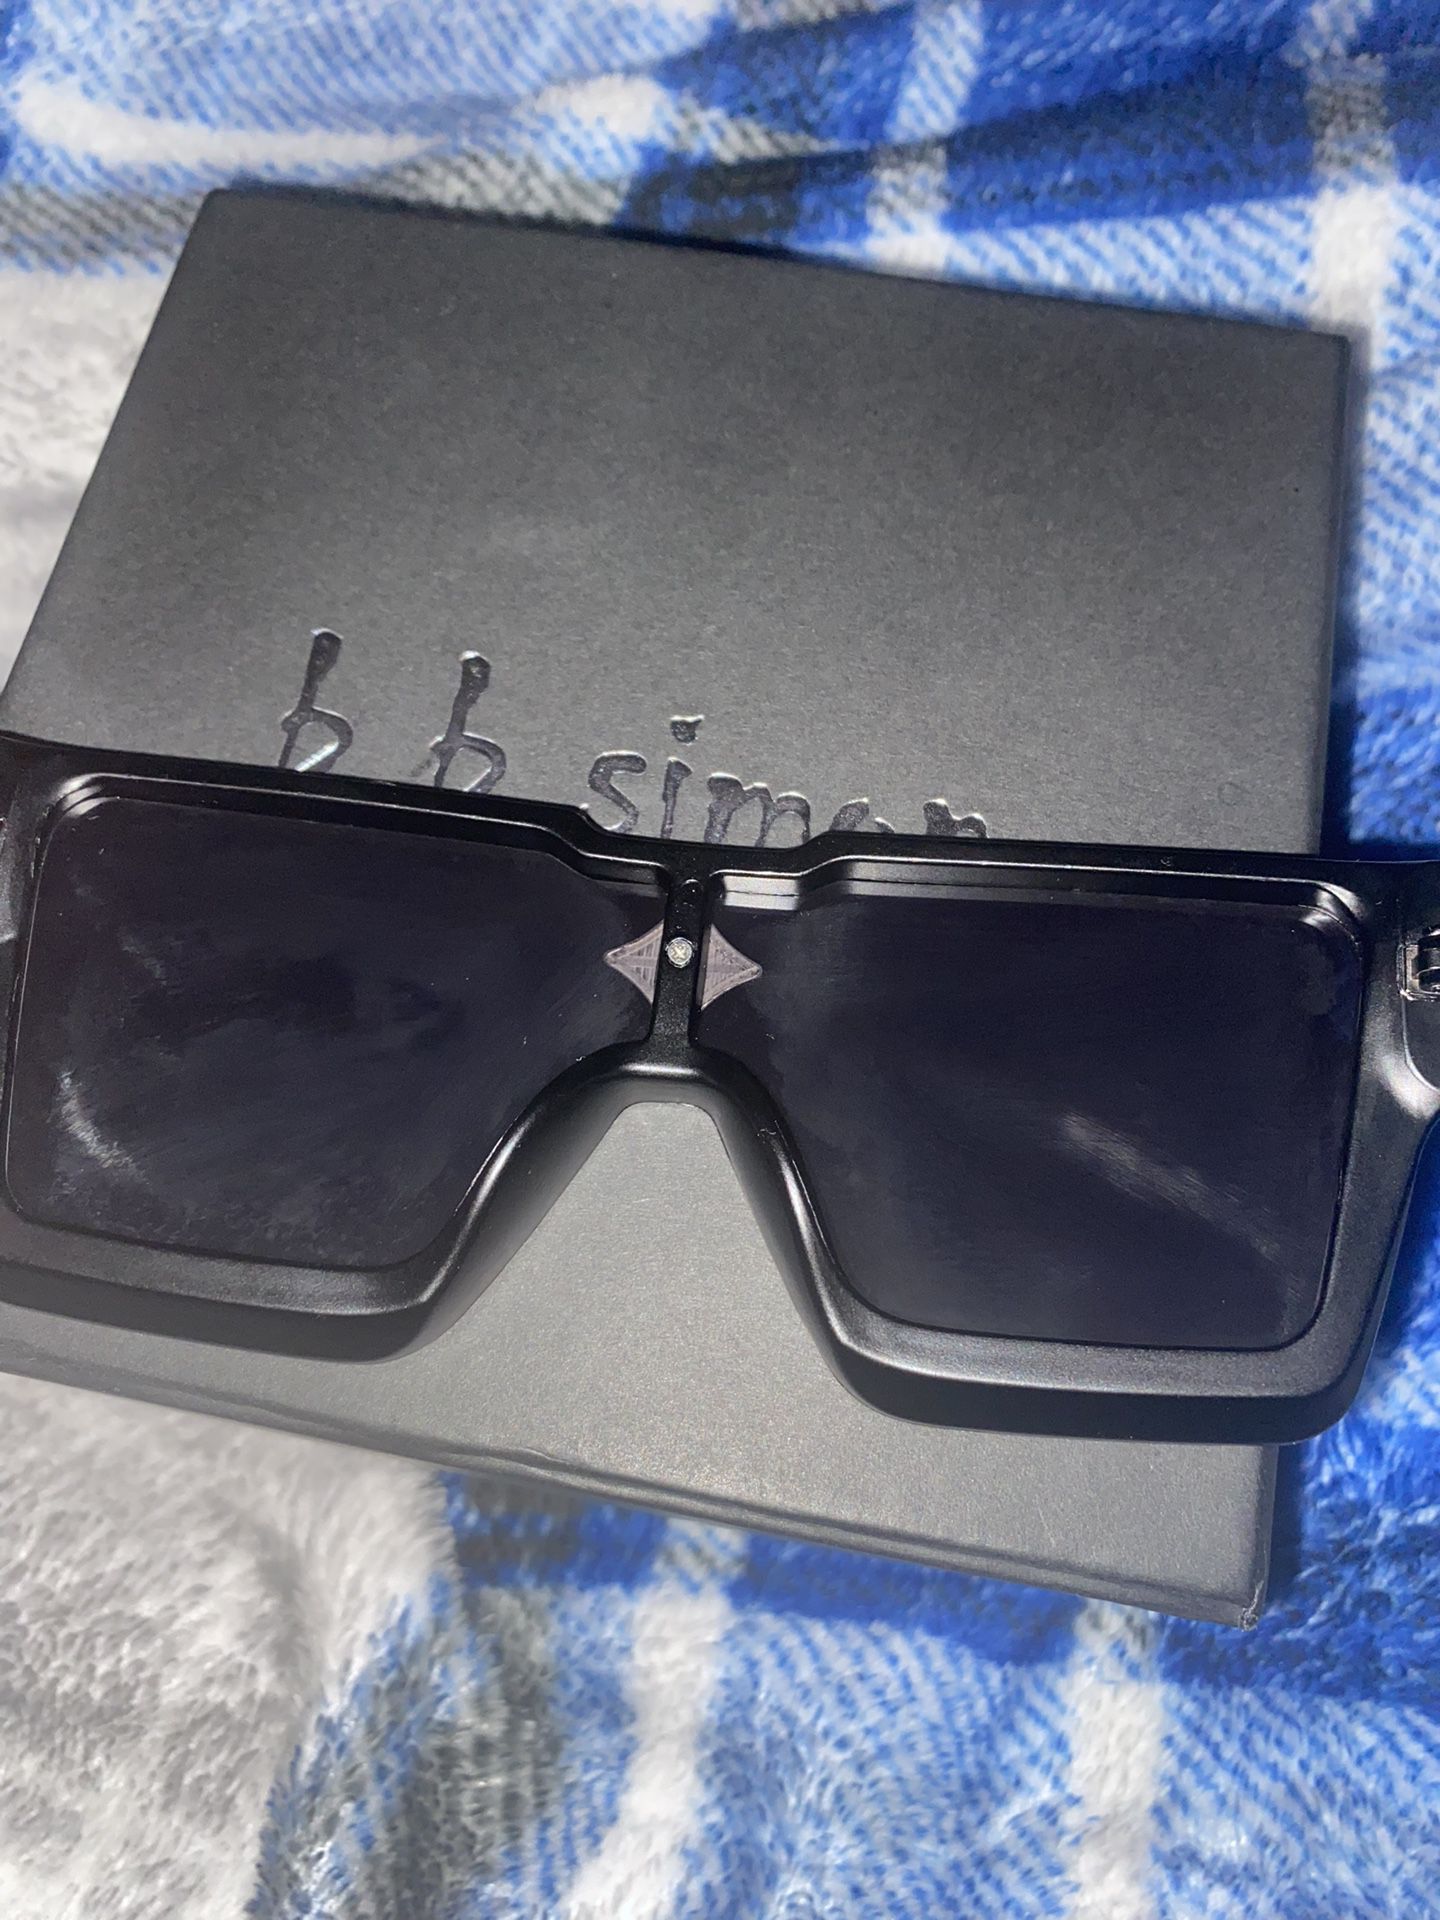 Louis Vuitton Cyclone Glasses for Sale in Taylorsville, GA - OfferUp